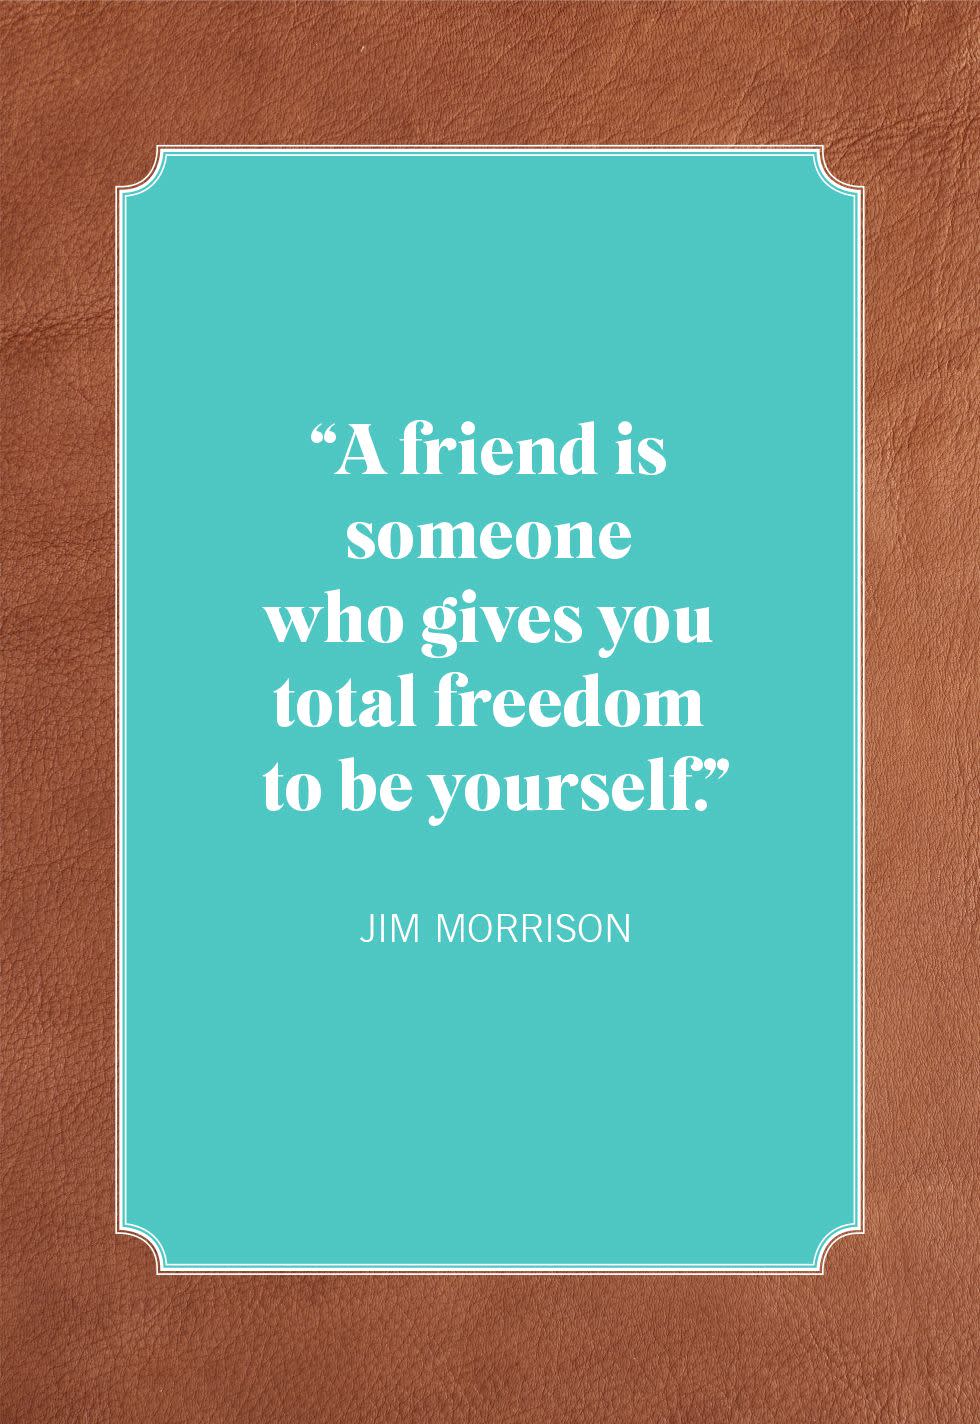 valentines day quotes for friends jim morrison